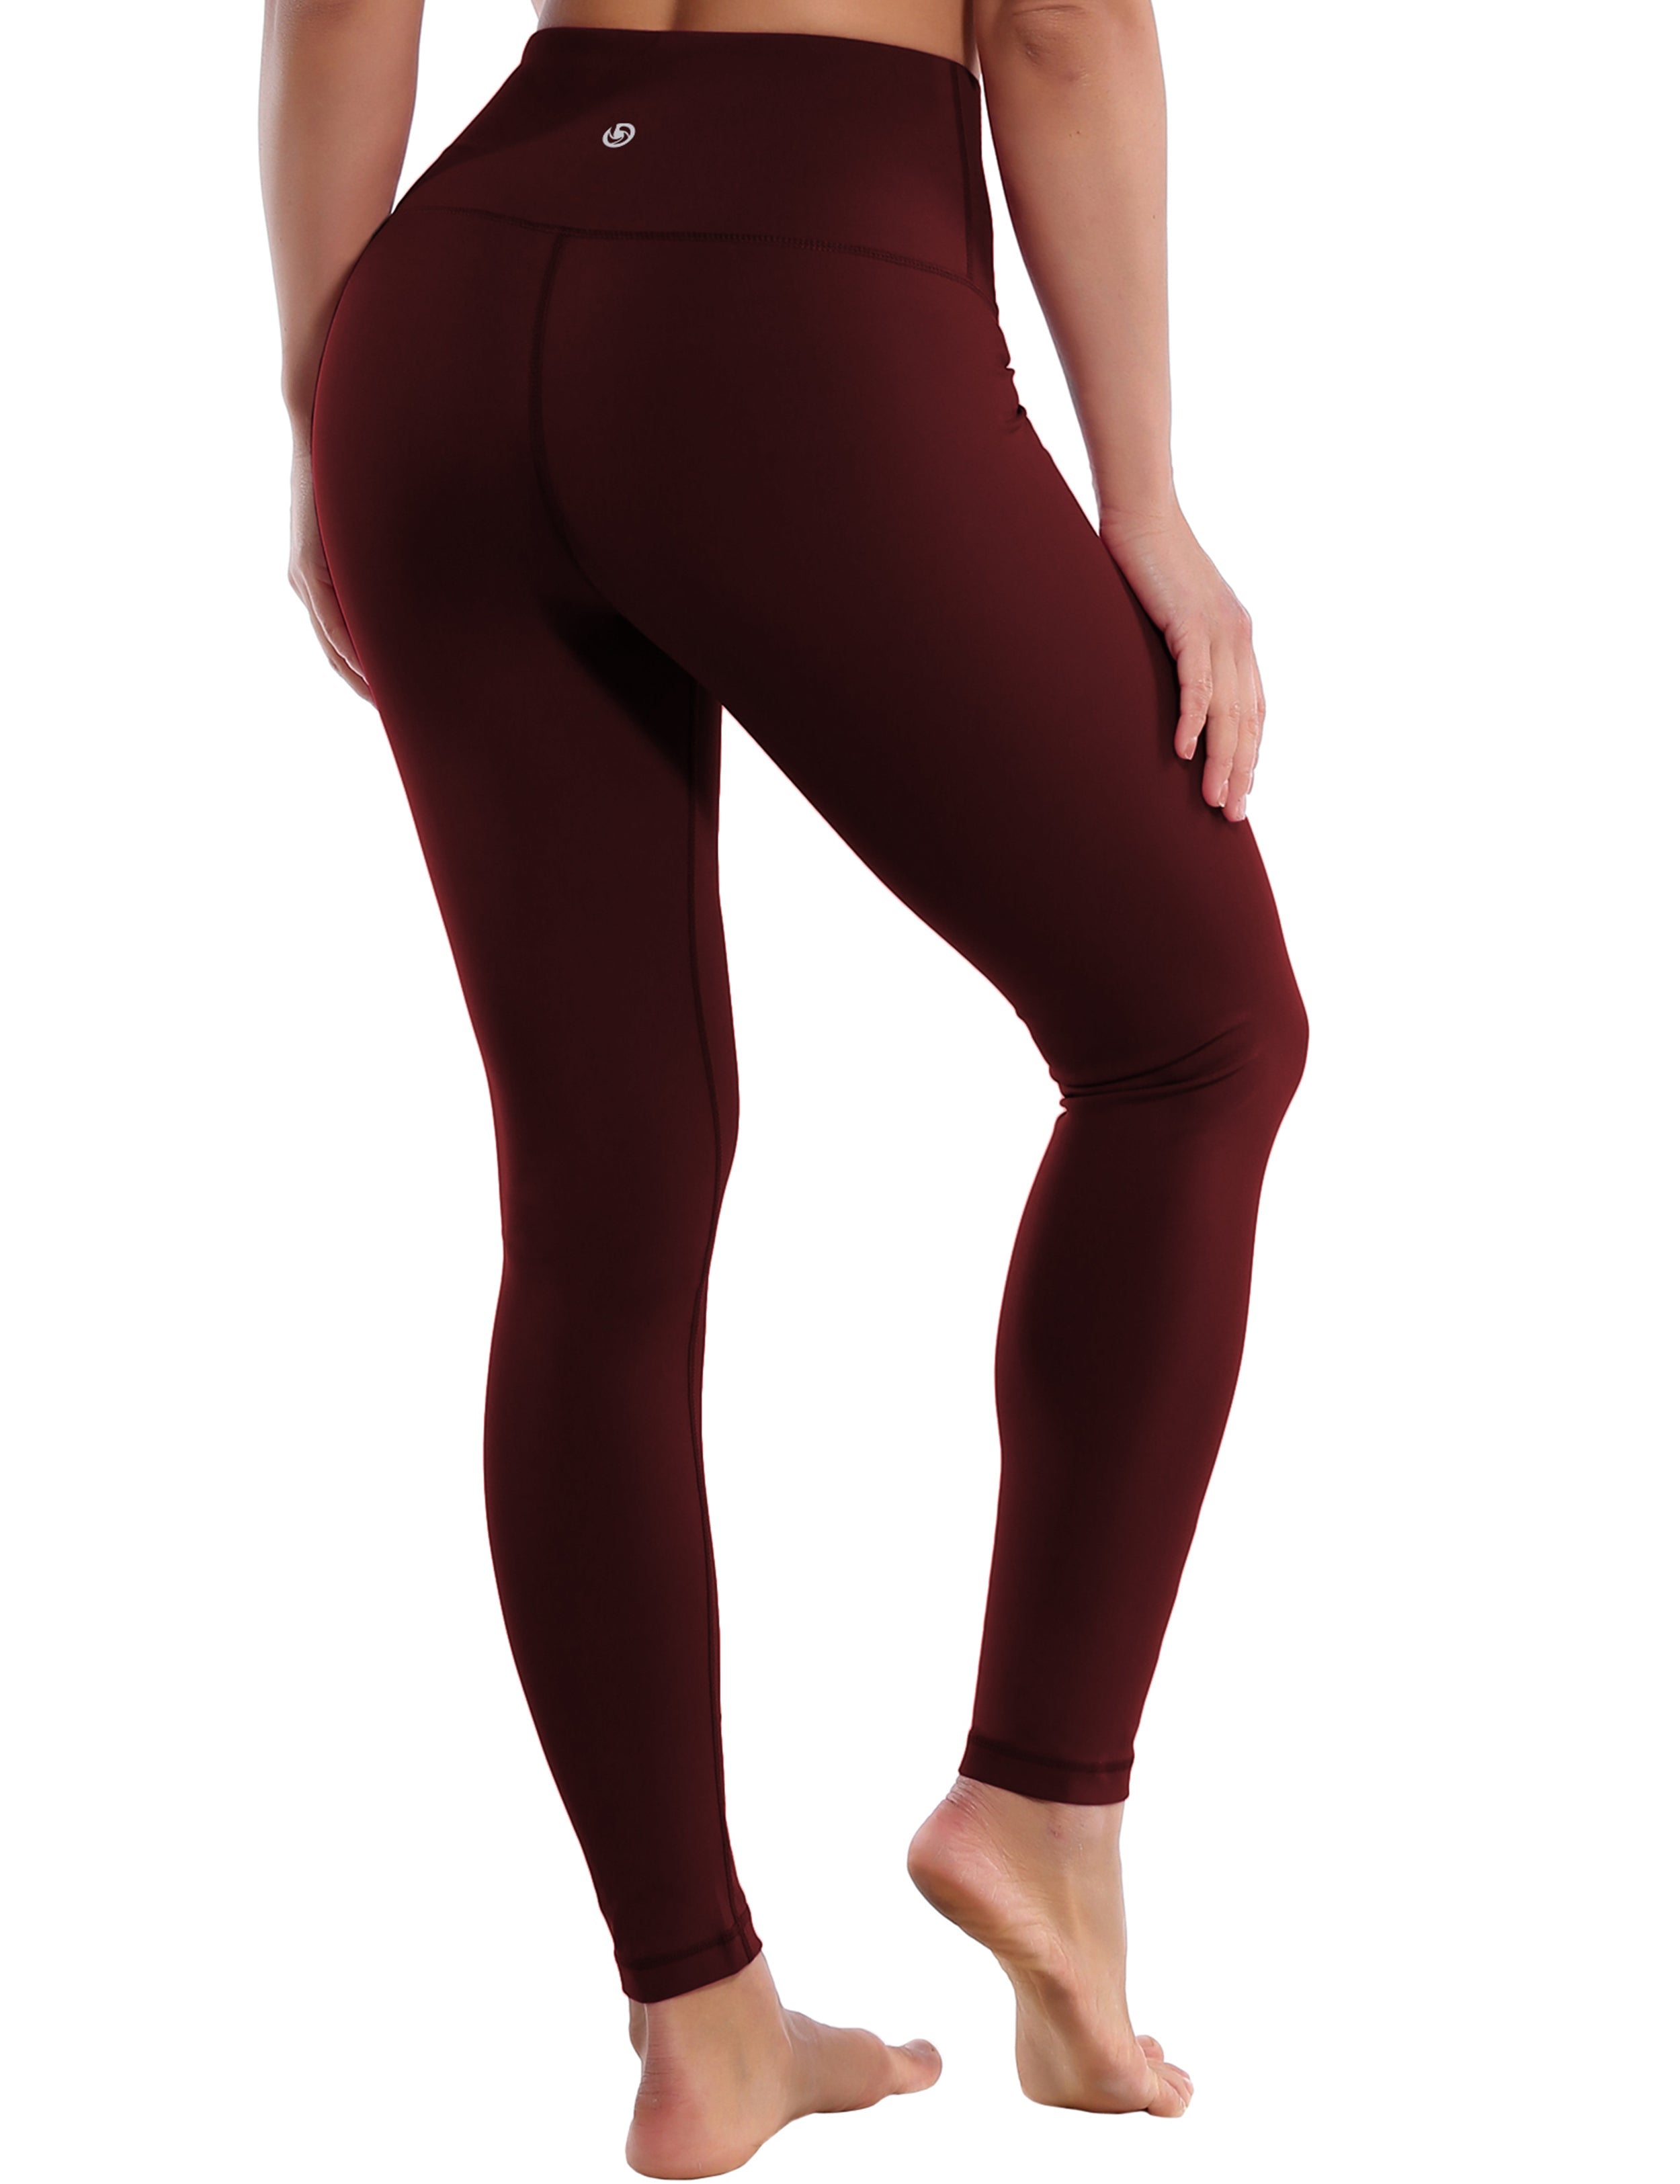 High Waist Pilates Pants cherryred 75%Nylon/25%Spandex Fabric doesn't attract lint easily 4-way stretch No see-through Moisture-wicking Tummy control Inner pocket Four lengths